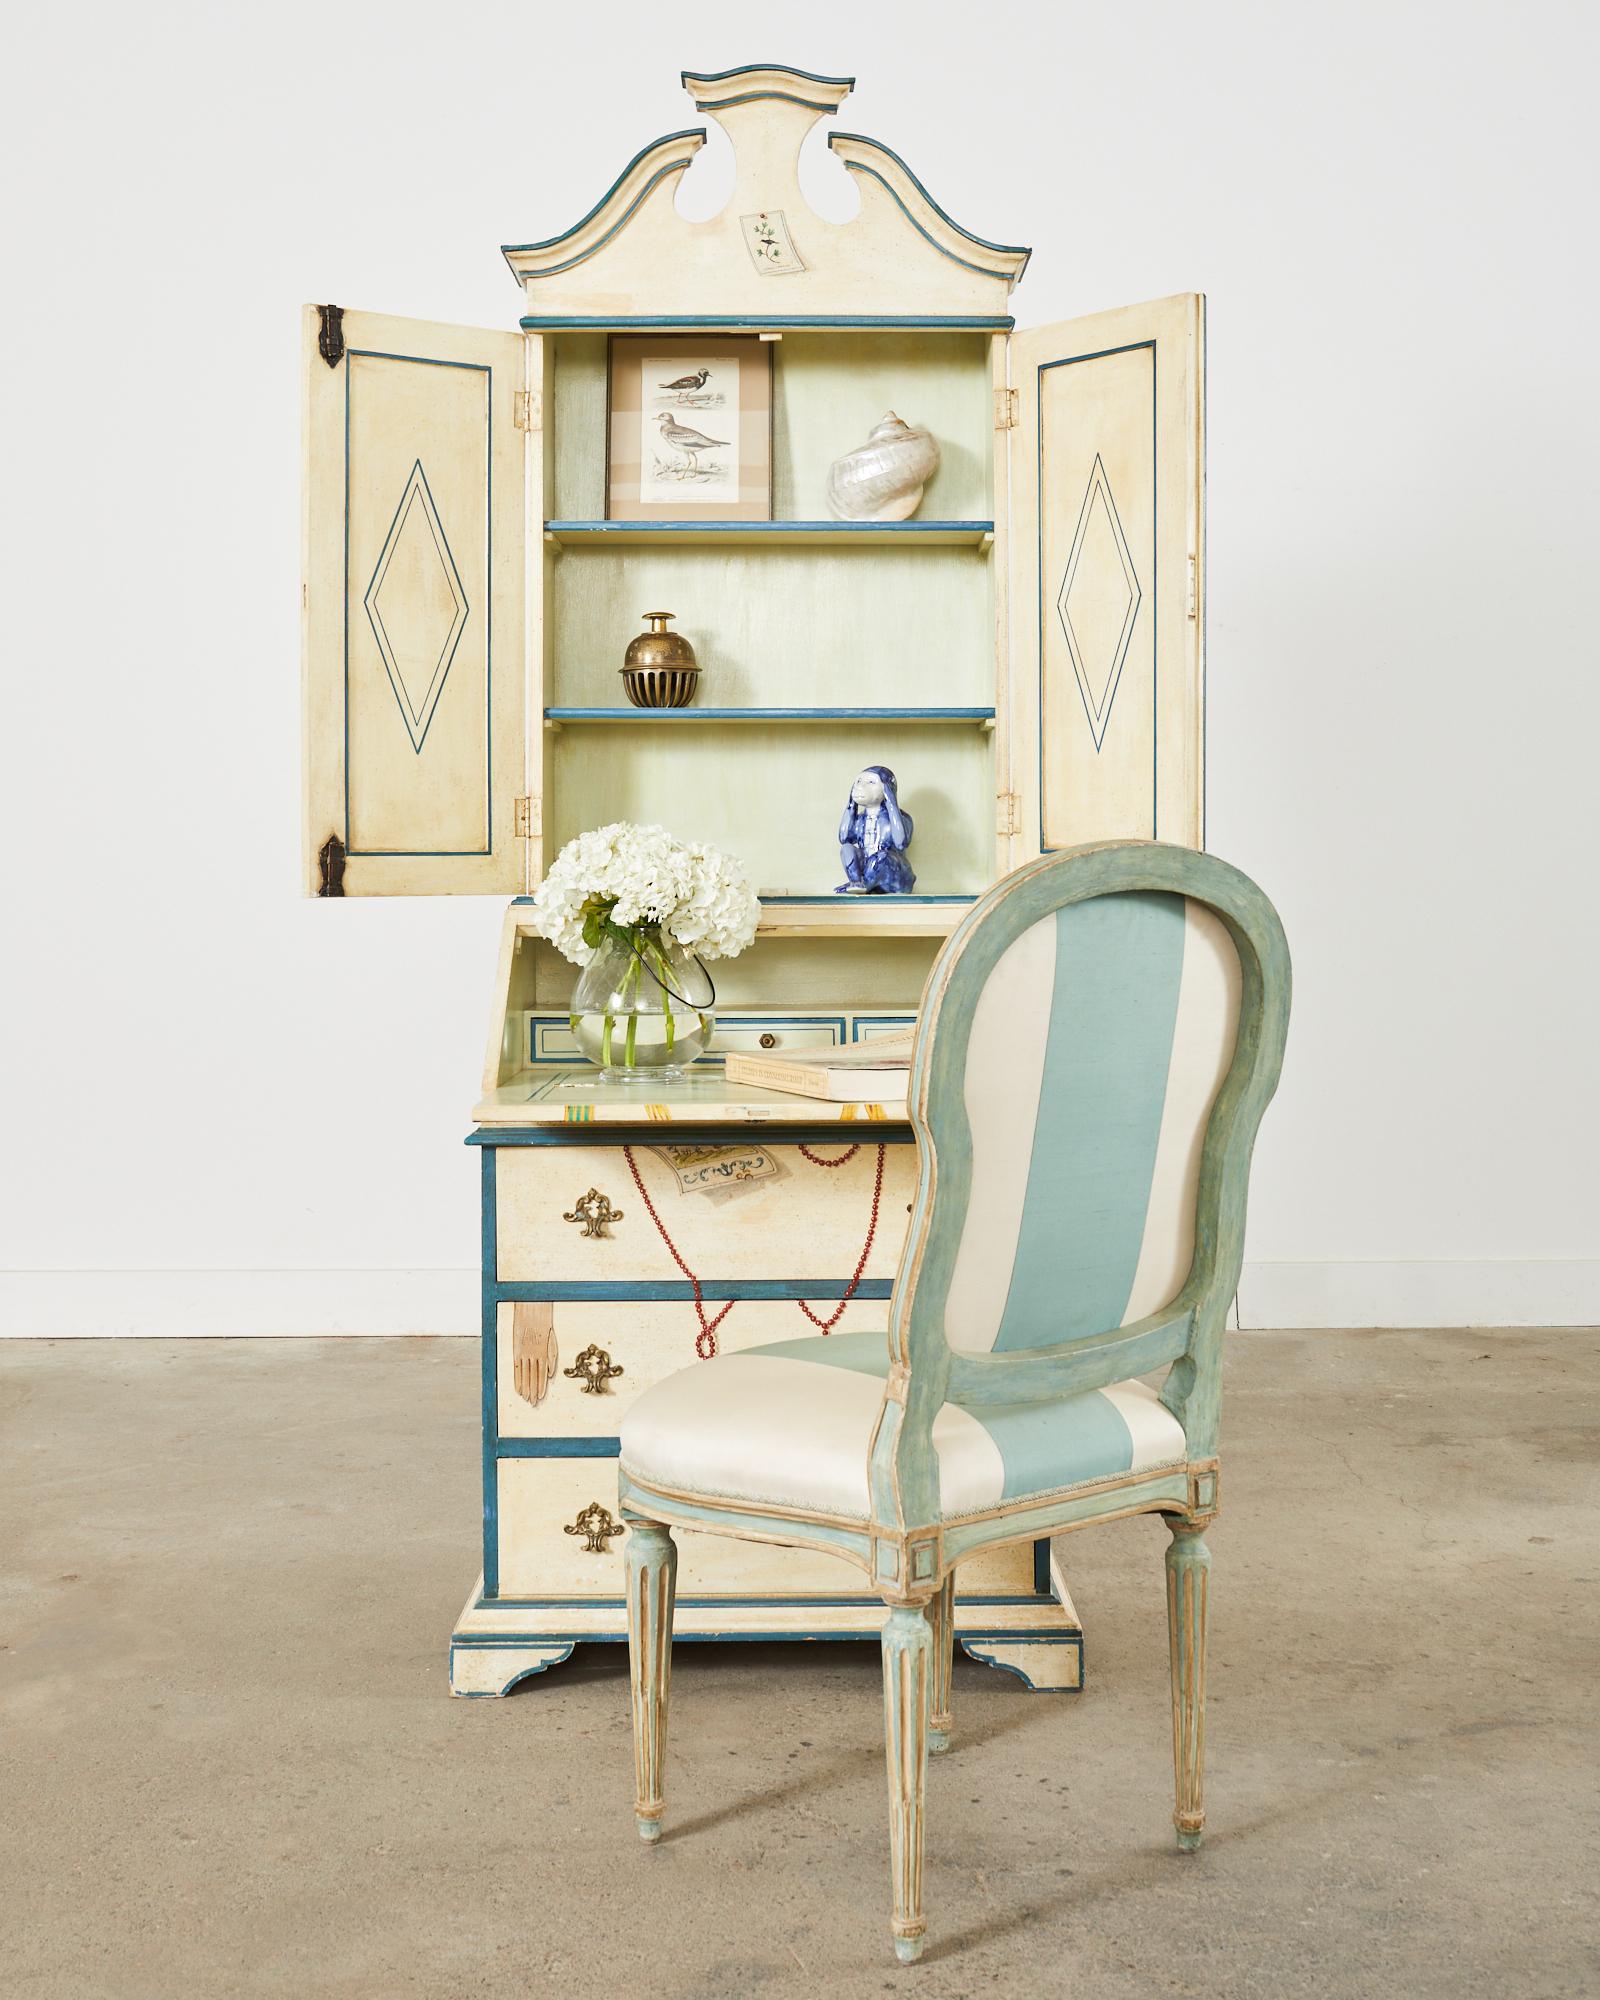 Impressive Italian regency two-part Trompe l'oeil secretaire with a drop-front desk made in Florence. The case features beautifully hand-painted whimsical motifs that decorate the case. The drop front desk measures 29.5 inches high and is fitted